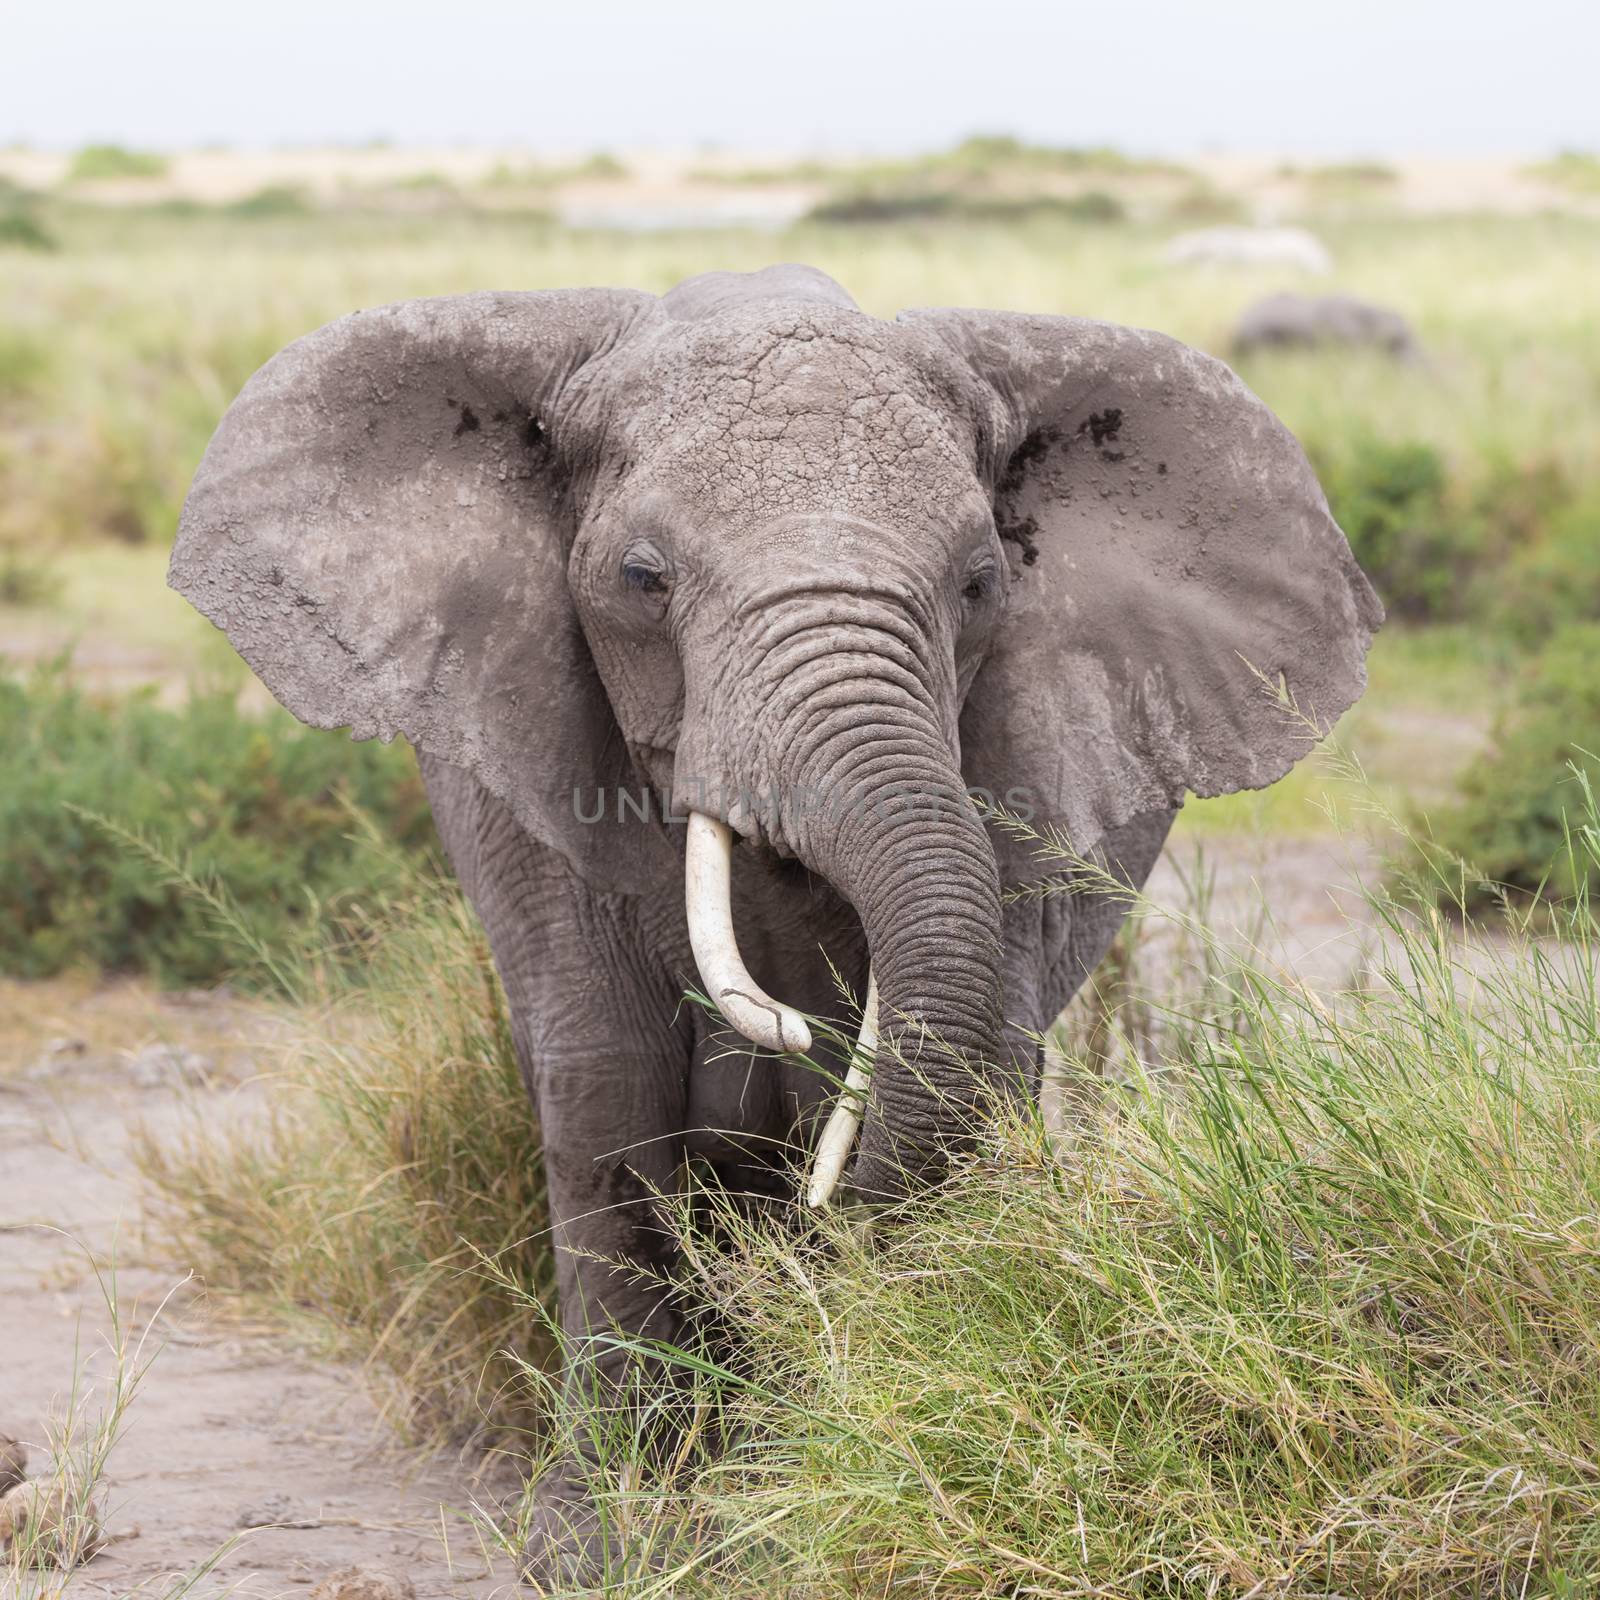 Elephant at Amboseli National Park, formerly Maasai Amboseli Game Reserve, is in Kajiado District, Rift Valley Province in Kenya. The ecosystem that spreads across the Kenya-Tanzania border.